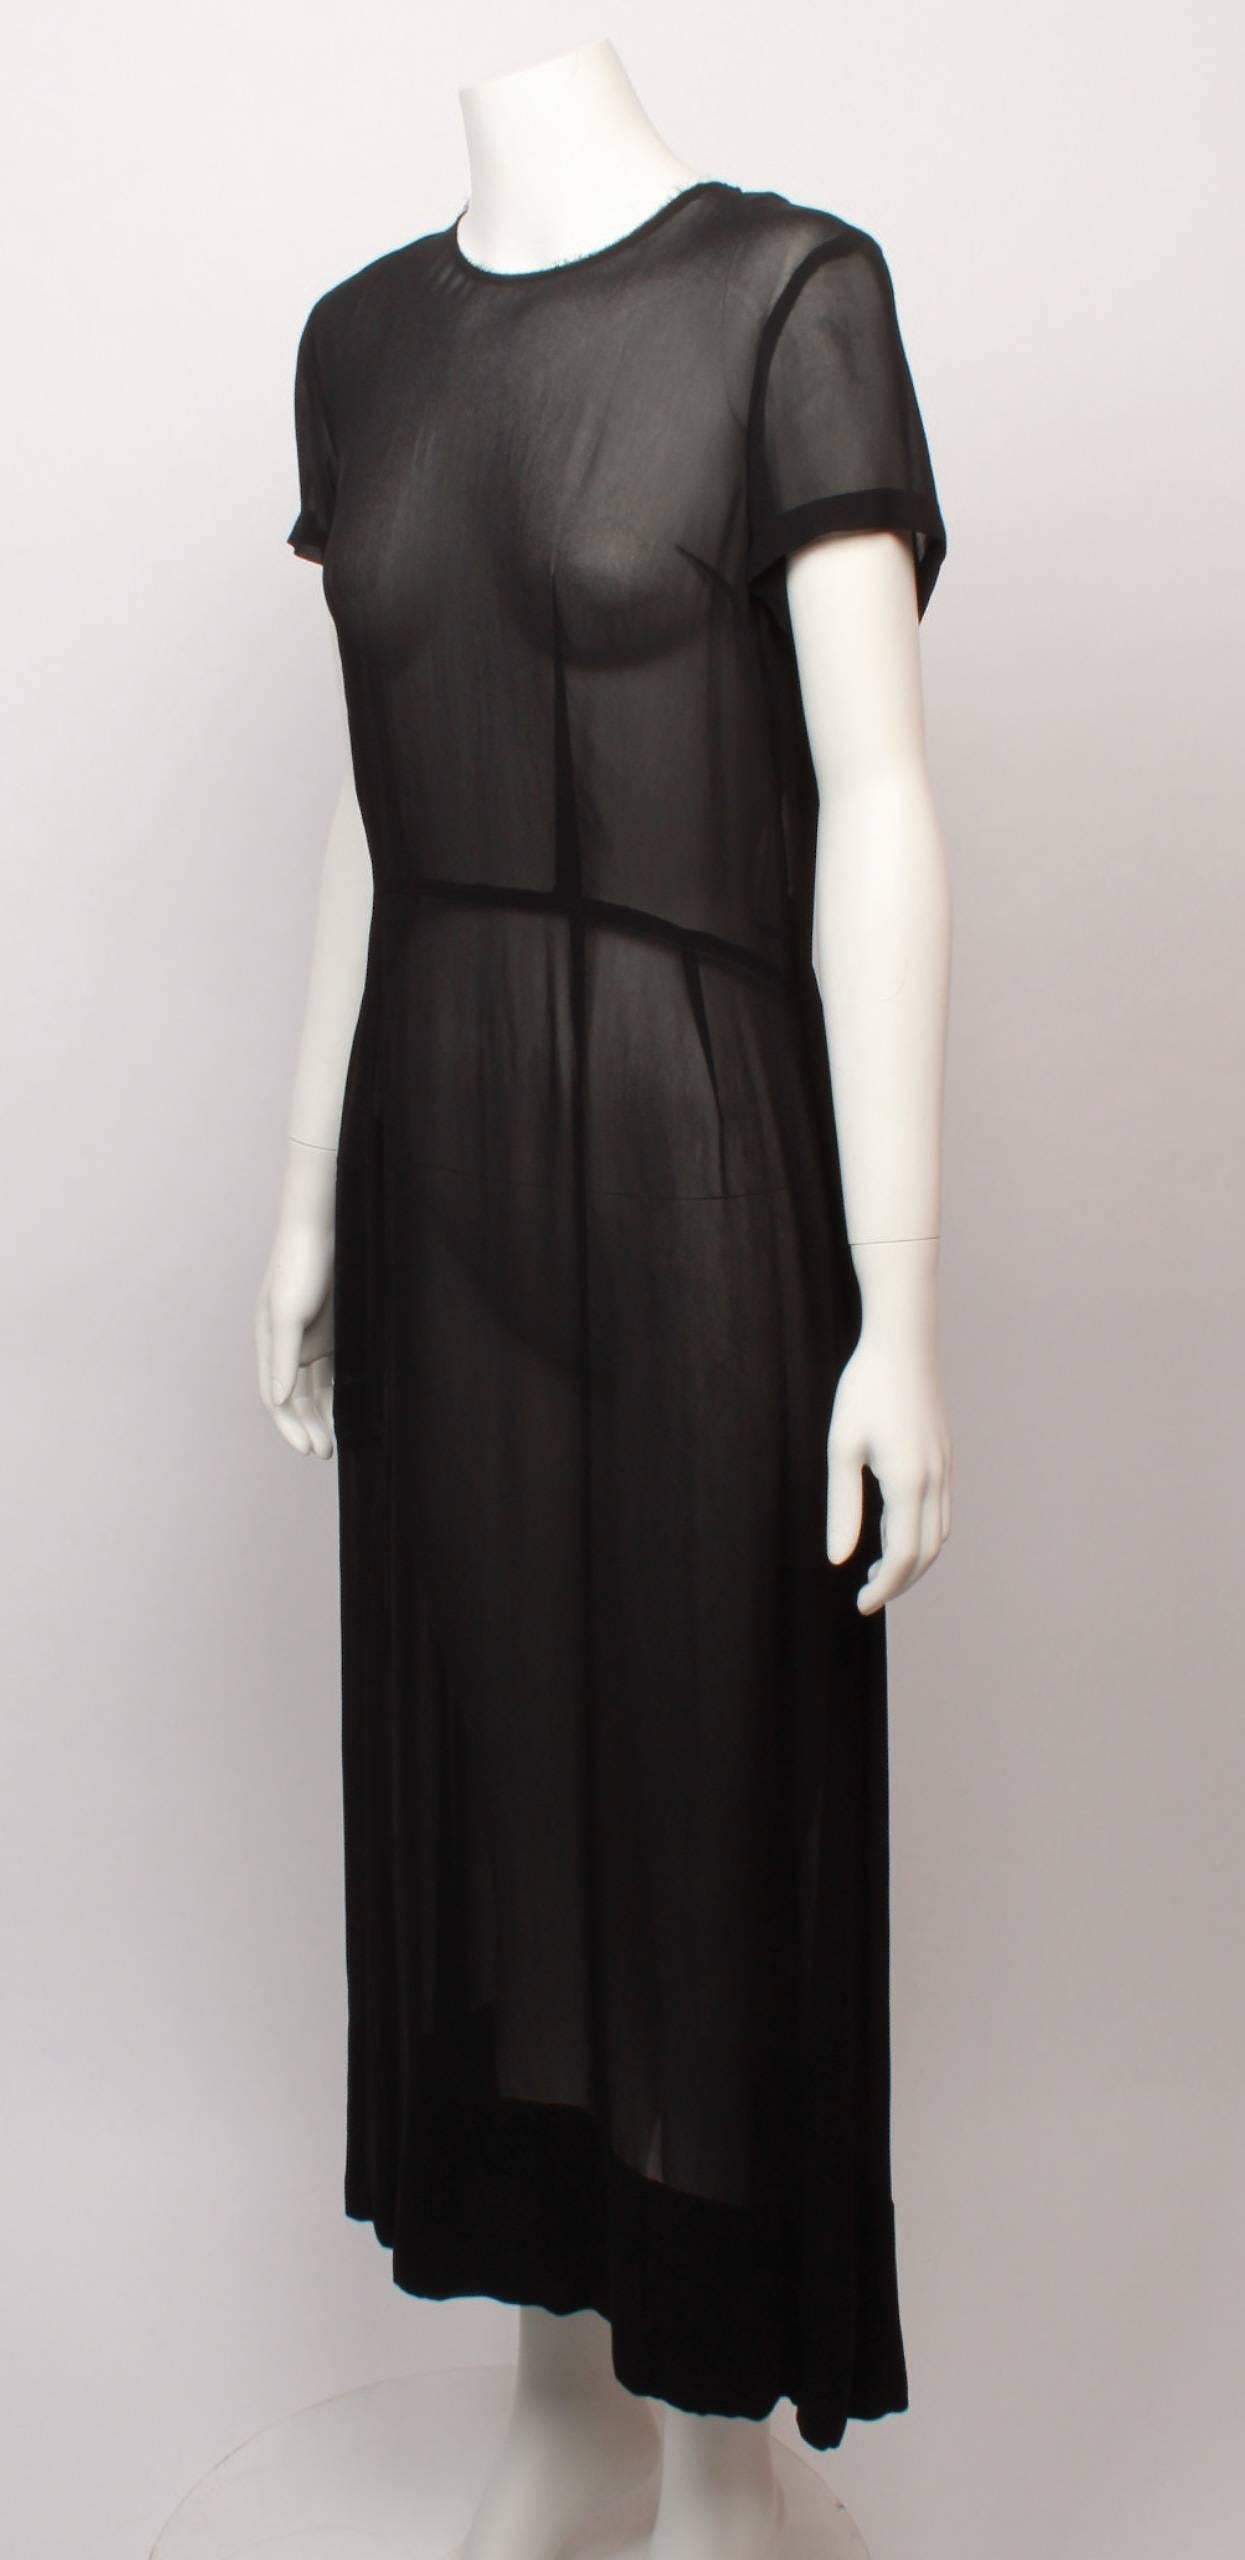 Comme Des Garcons shell dress in sheer black georgette. Features short sleeve, fitted waistline and exposed nickel zipper back closure. Below the knee flared hemline.  Label is dated AD 2000.
An amazing example of Comme Des Garcons timeless